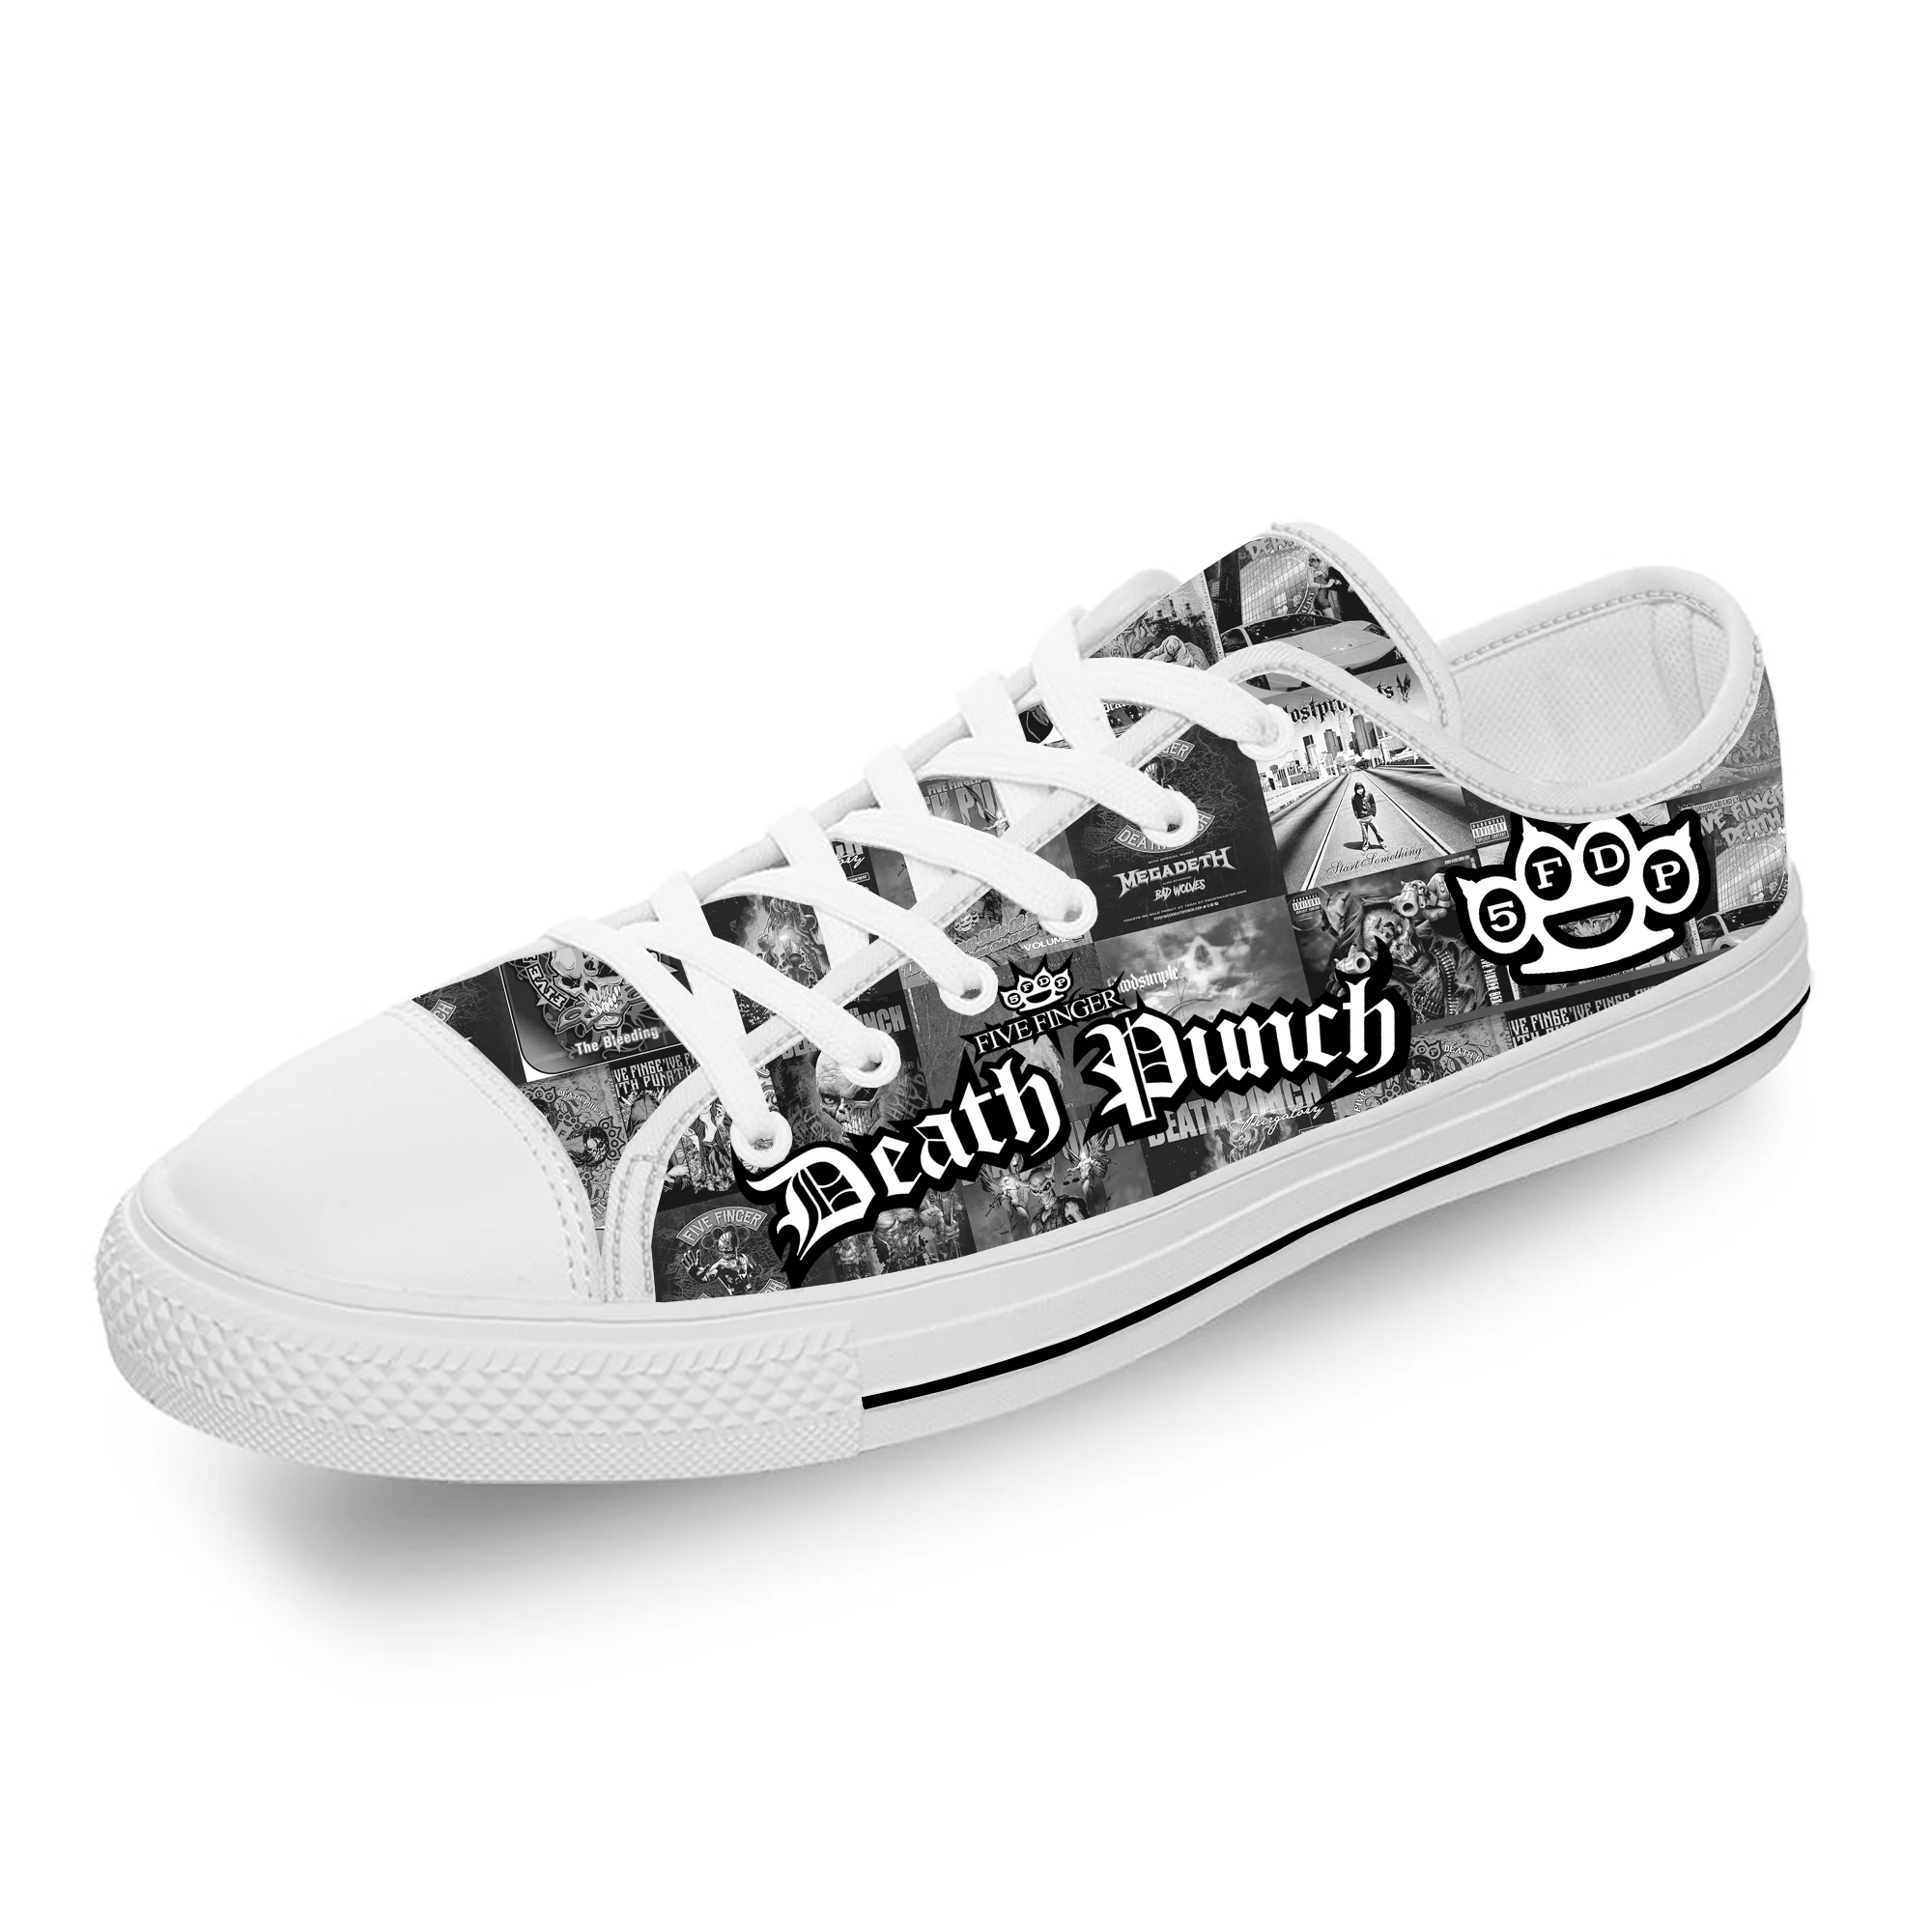 

Five Finger Death Punch Low Top Sneakers Mens Womens Teenager Casual Shoes Canvas White Cosplay Breathable Lightweight shoe